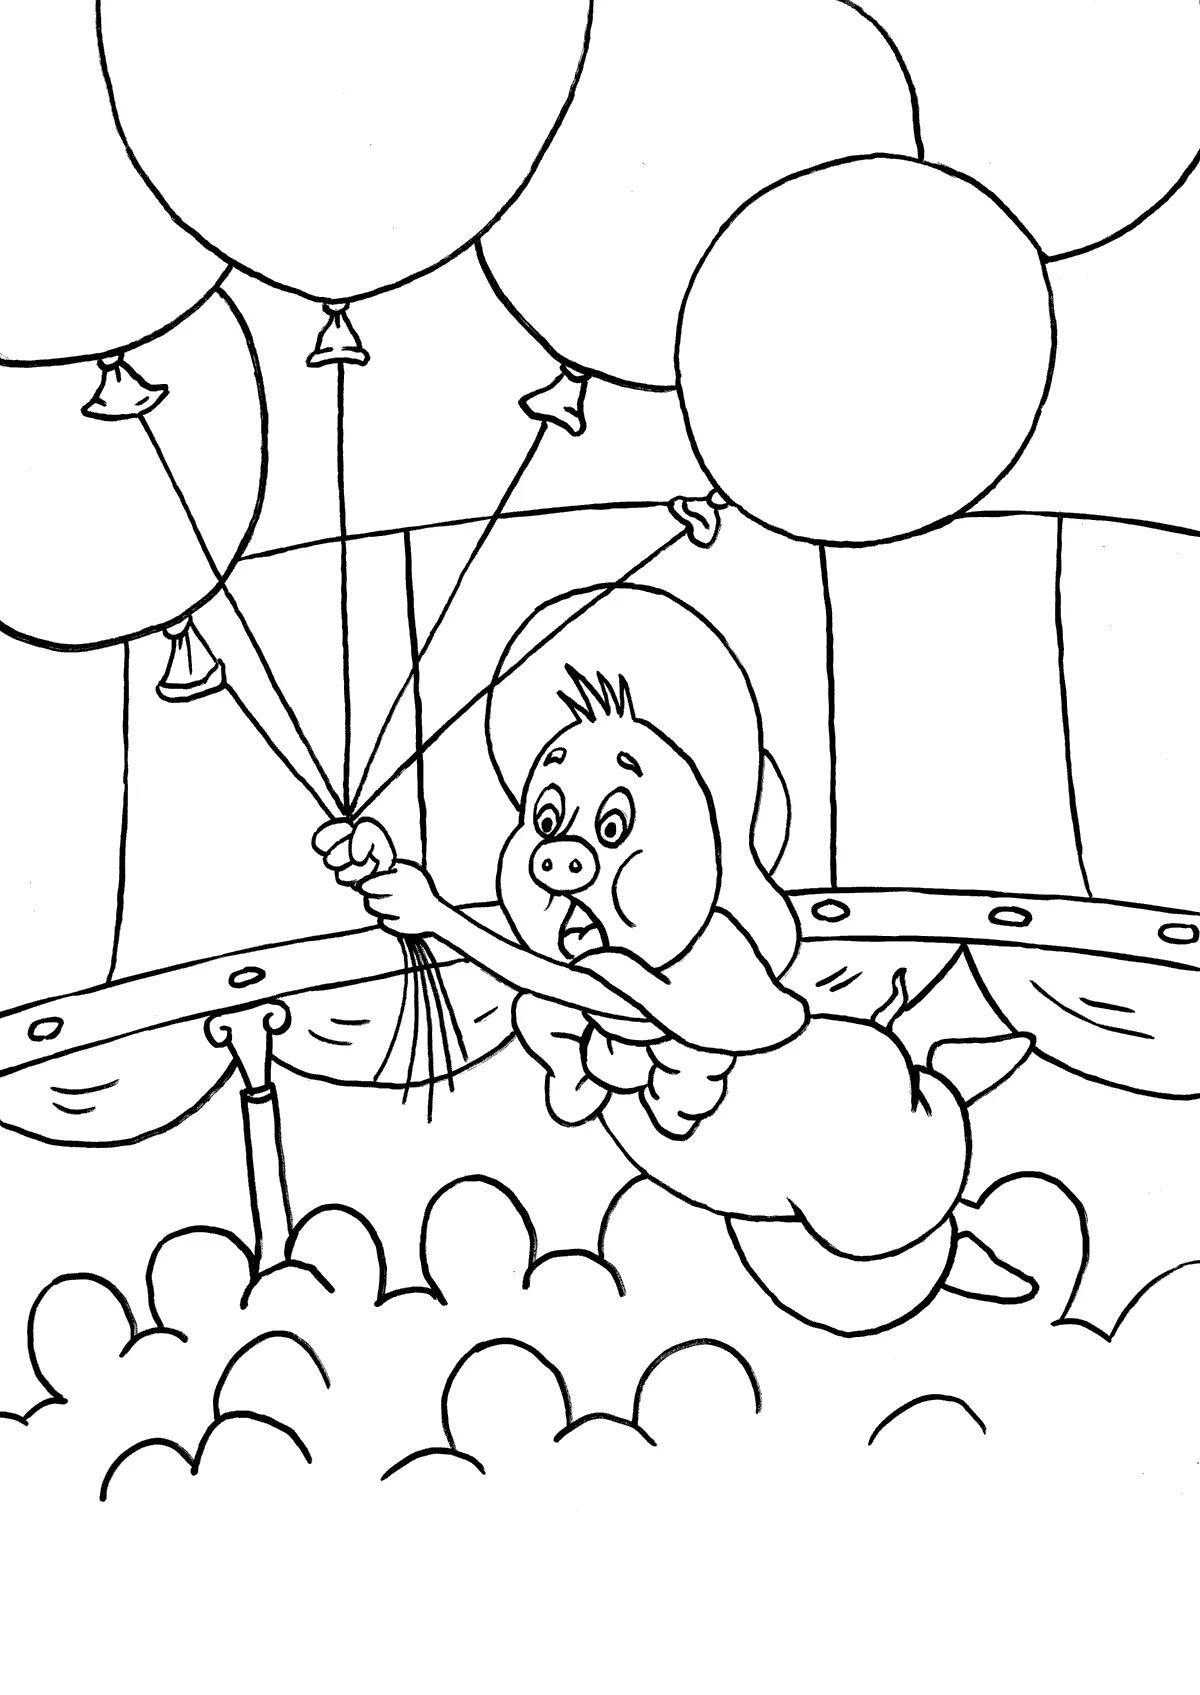 Adorable piggy funky coloring page